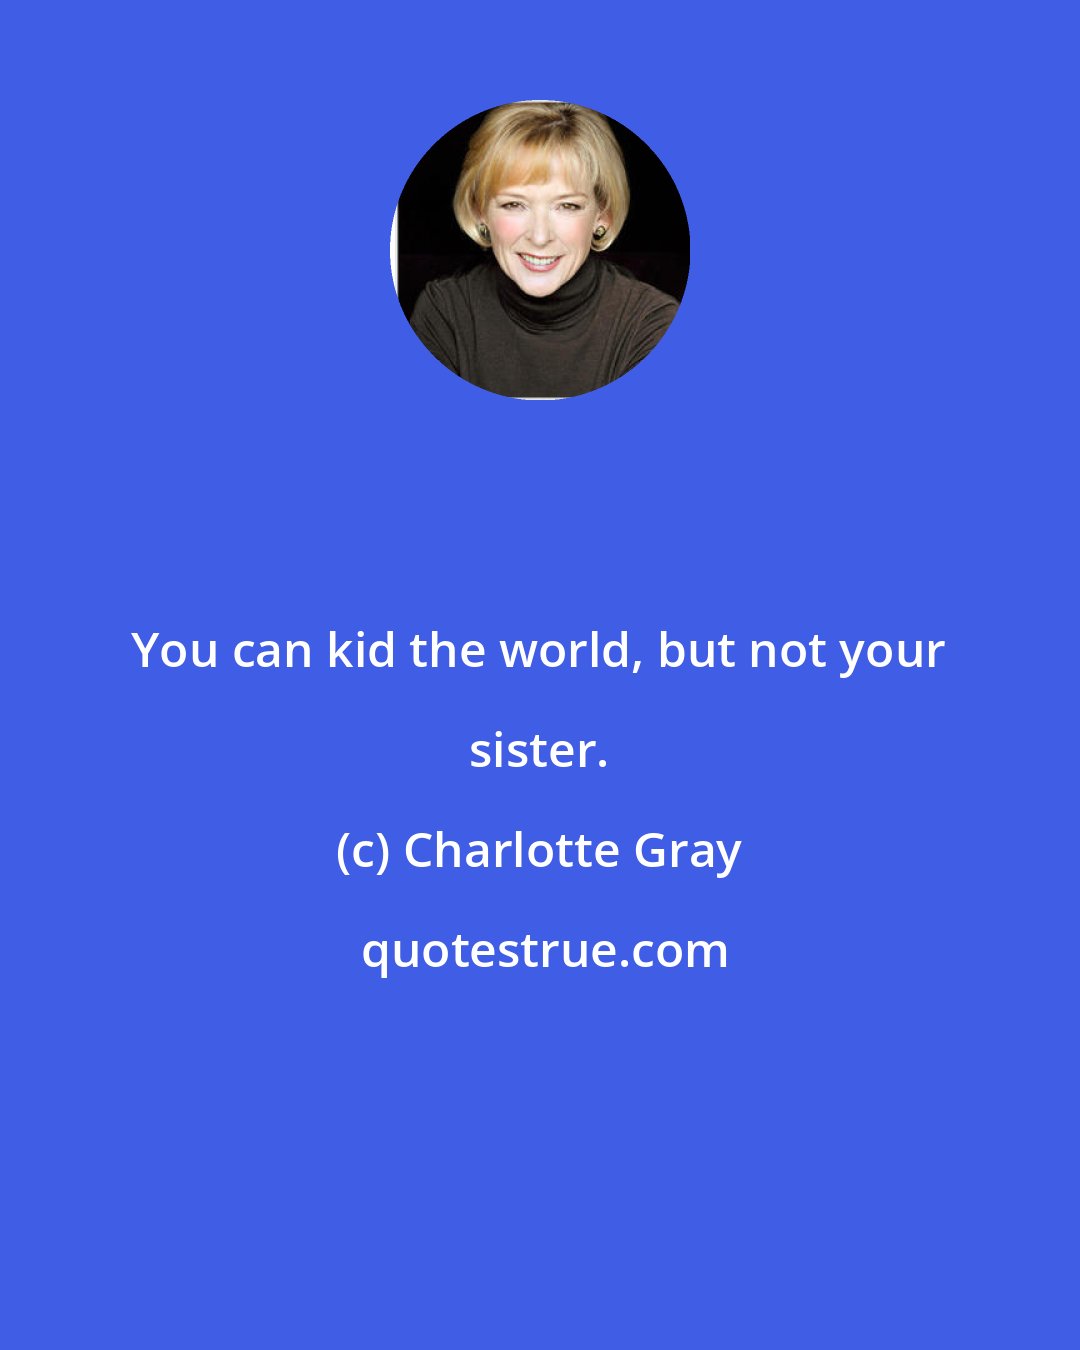 Charlotte Gray: You can kid the world, but not your sister.